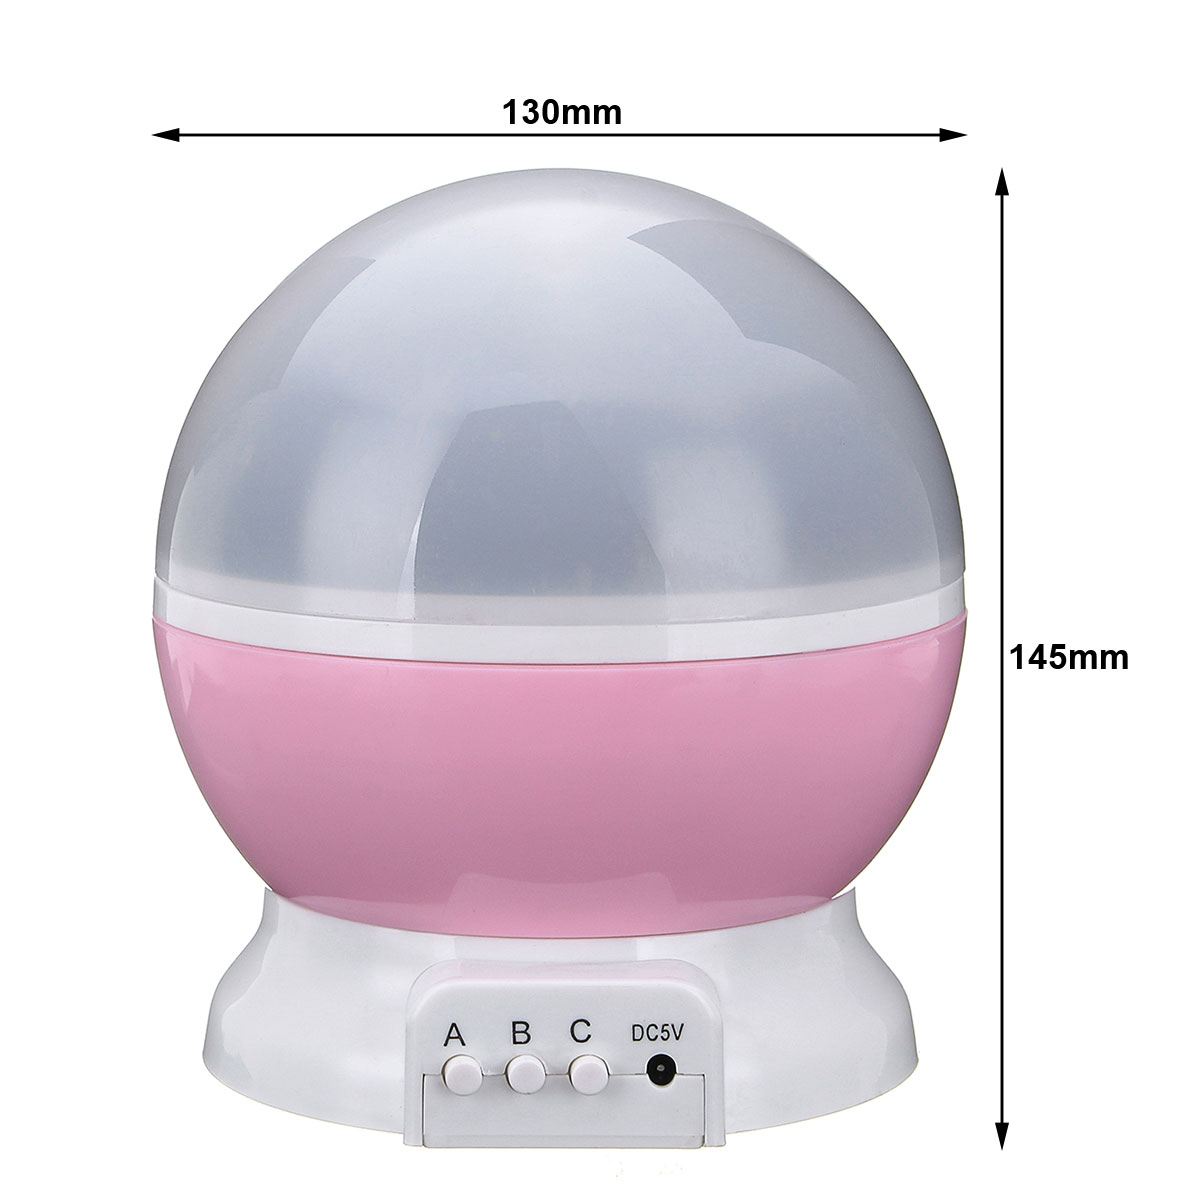 LED-Starry-Projector-Lamp-Baby-Night-Light-USB-Romantic-Rotating-Moon-Cosmos-Sky-Star-Projection-Lam-1937902-10